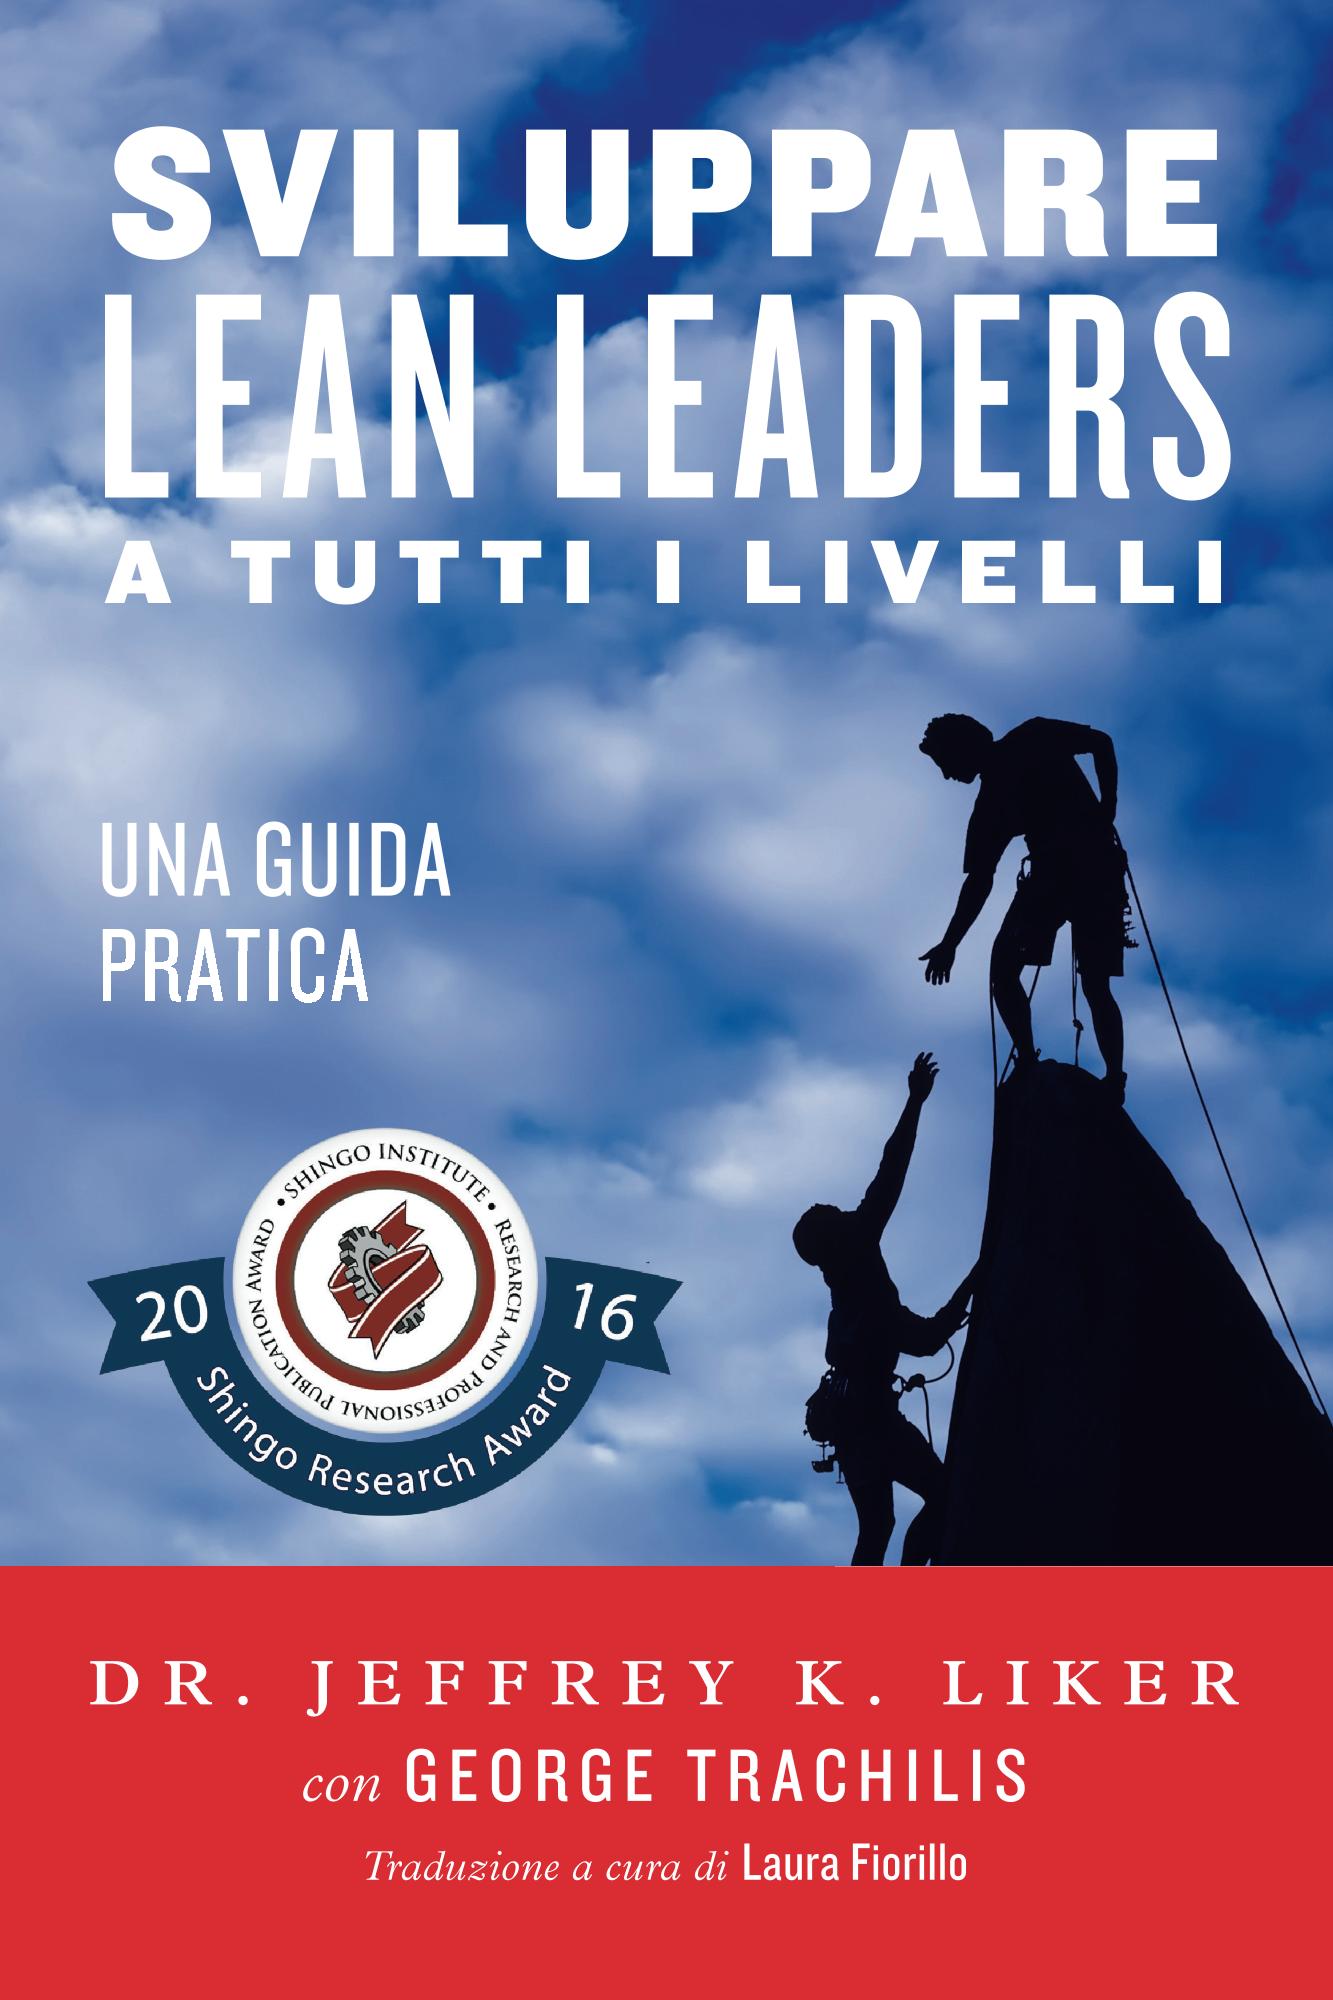 Developing Lean Leaders at All Levels by prof.Jeff Liker - now in Italian!